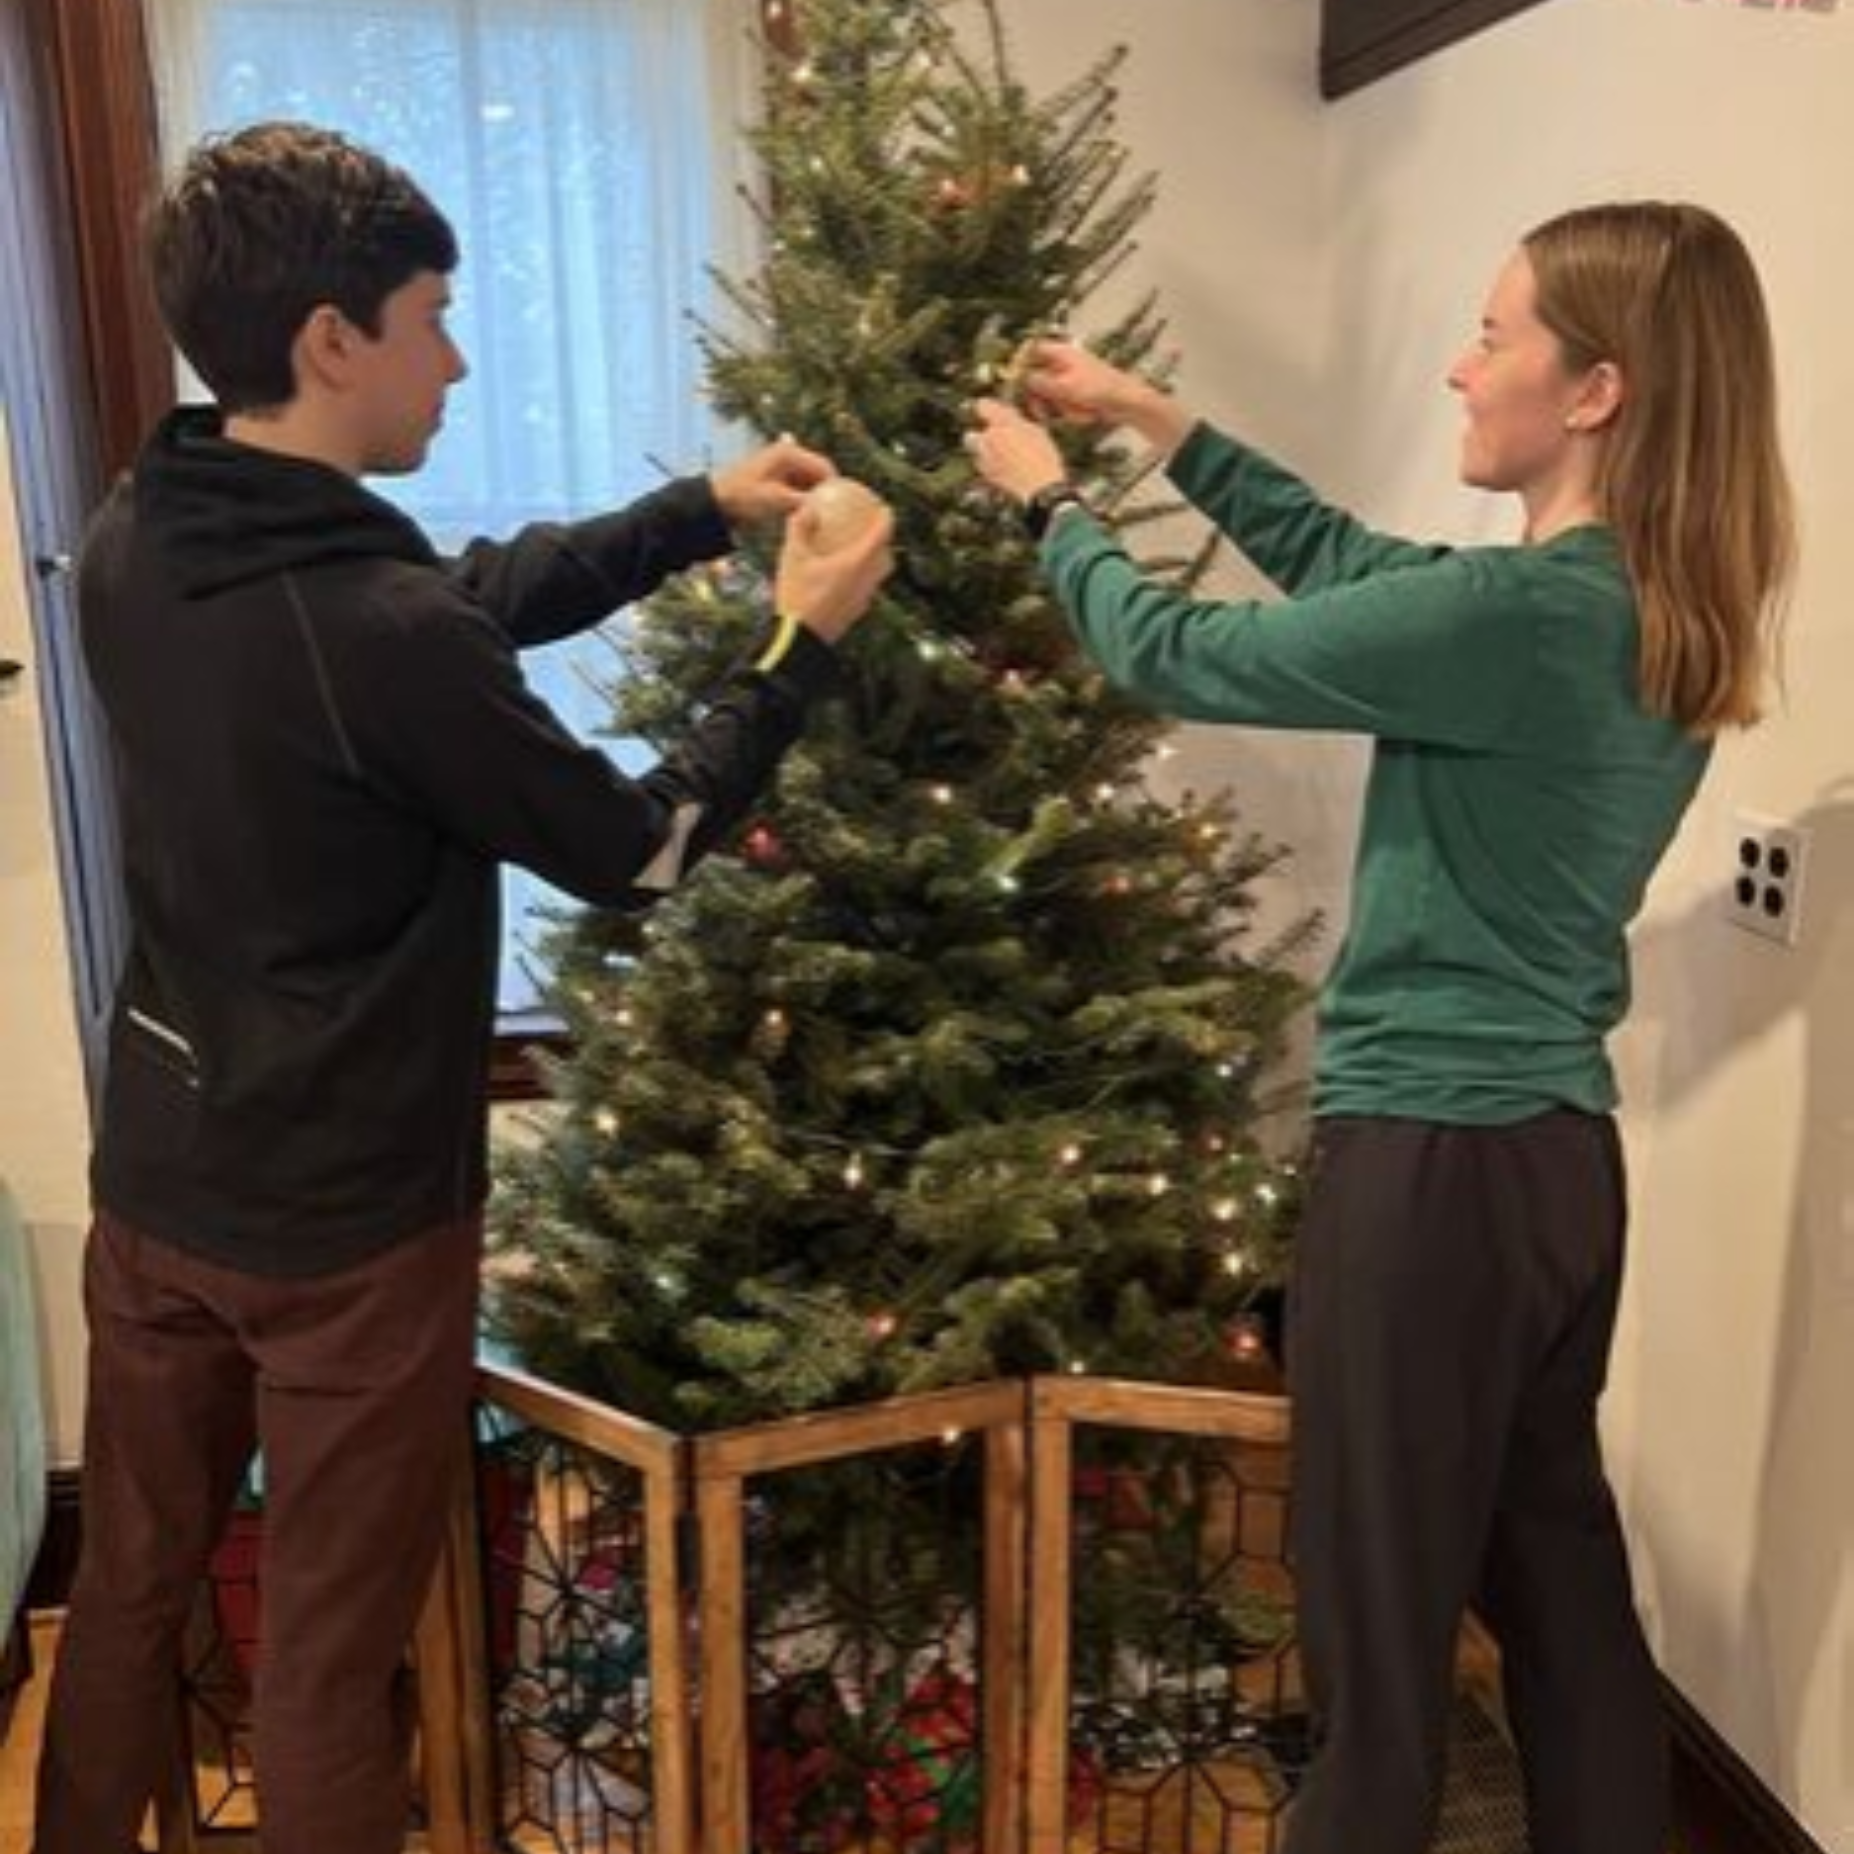 Decorating our Christmas tree